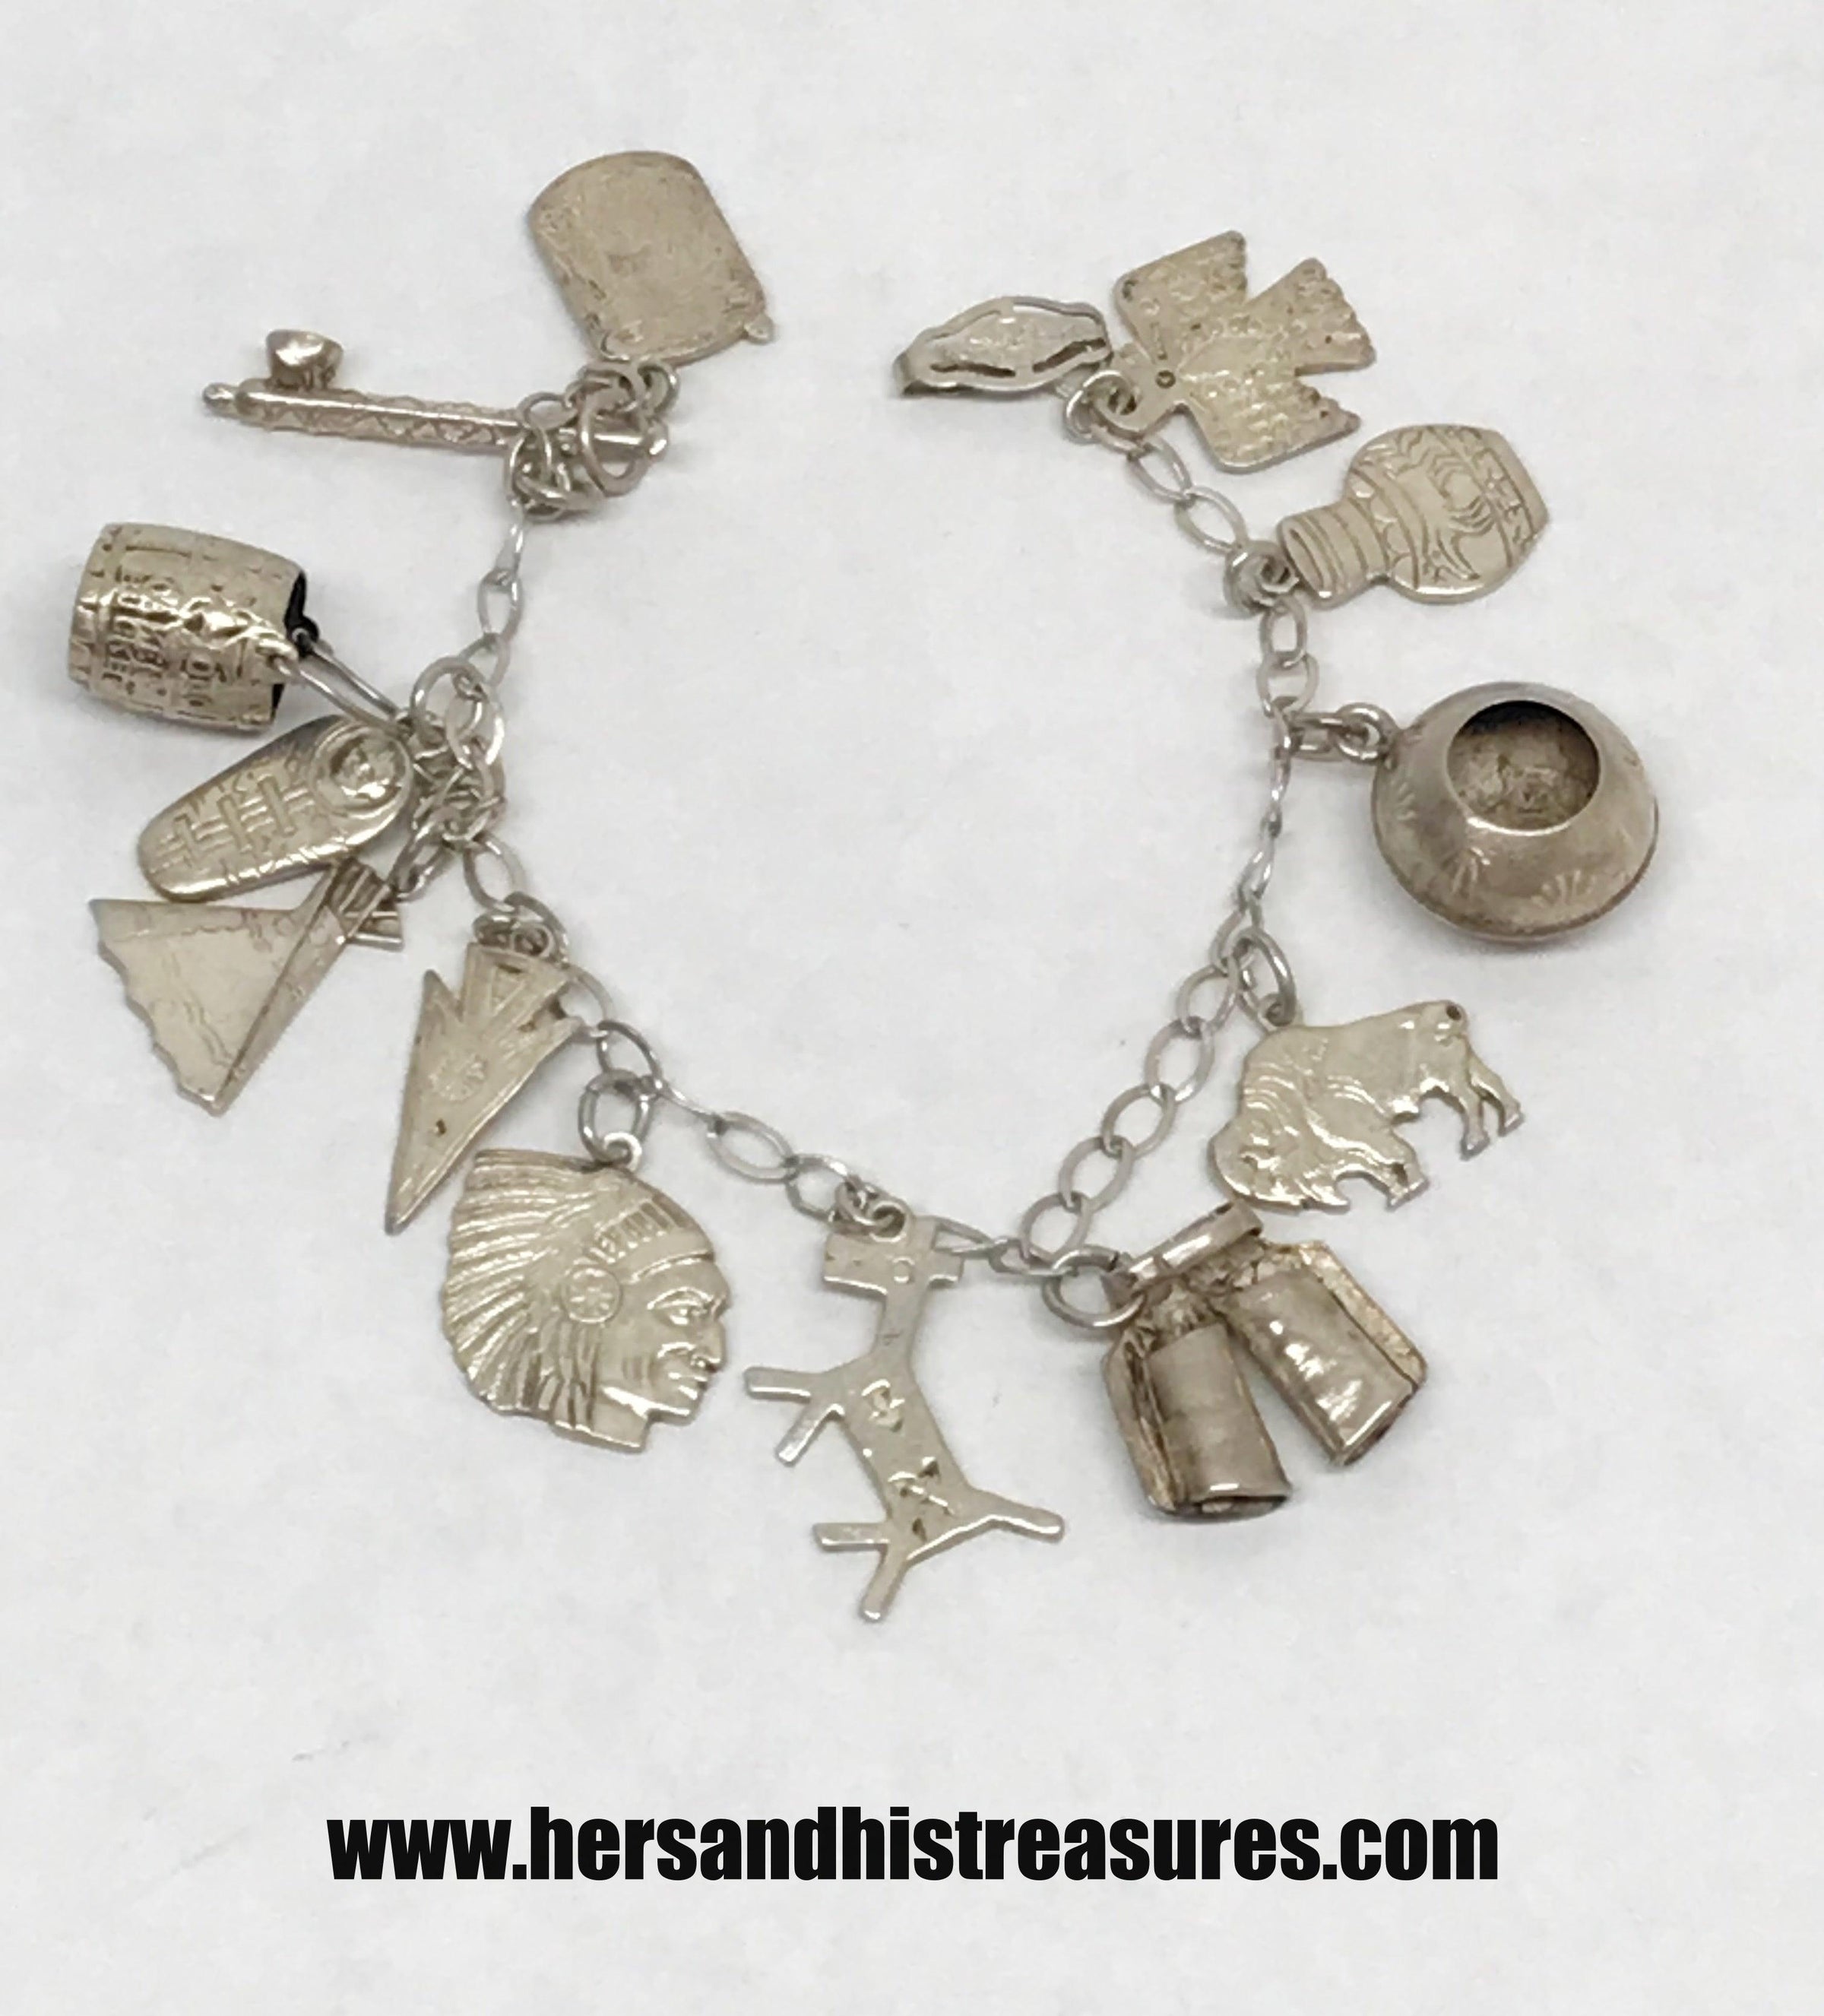 Antique Sterling Silver Charm Bracelet Stamped Every Link -  Norway